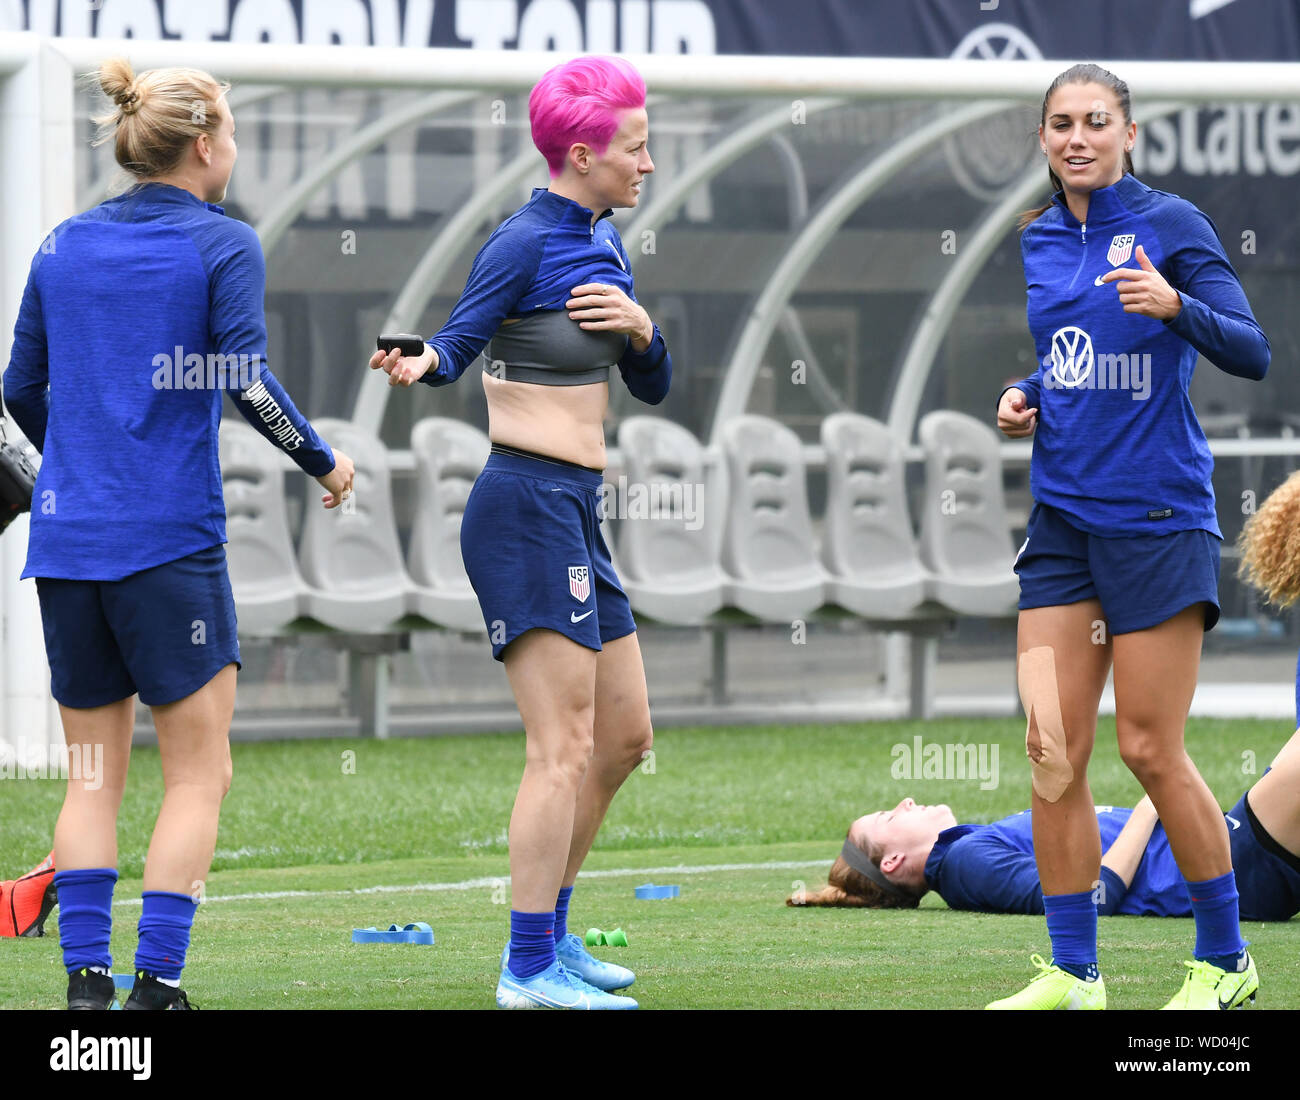 Philadelphia, Pennsylvania, USA. 28th Aug, 2019. U.S. WNT player MEGAN RAPINO warms up with teammates during an open practice at Lincoln Financial Field in Philadelphia Pennsylvania Credit: Ricky Fitchett/ZUMA Wire/Alamy Live News Stock Photo